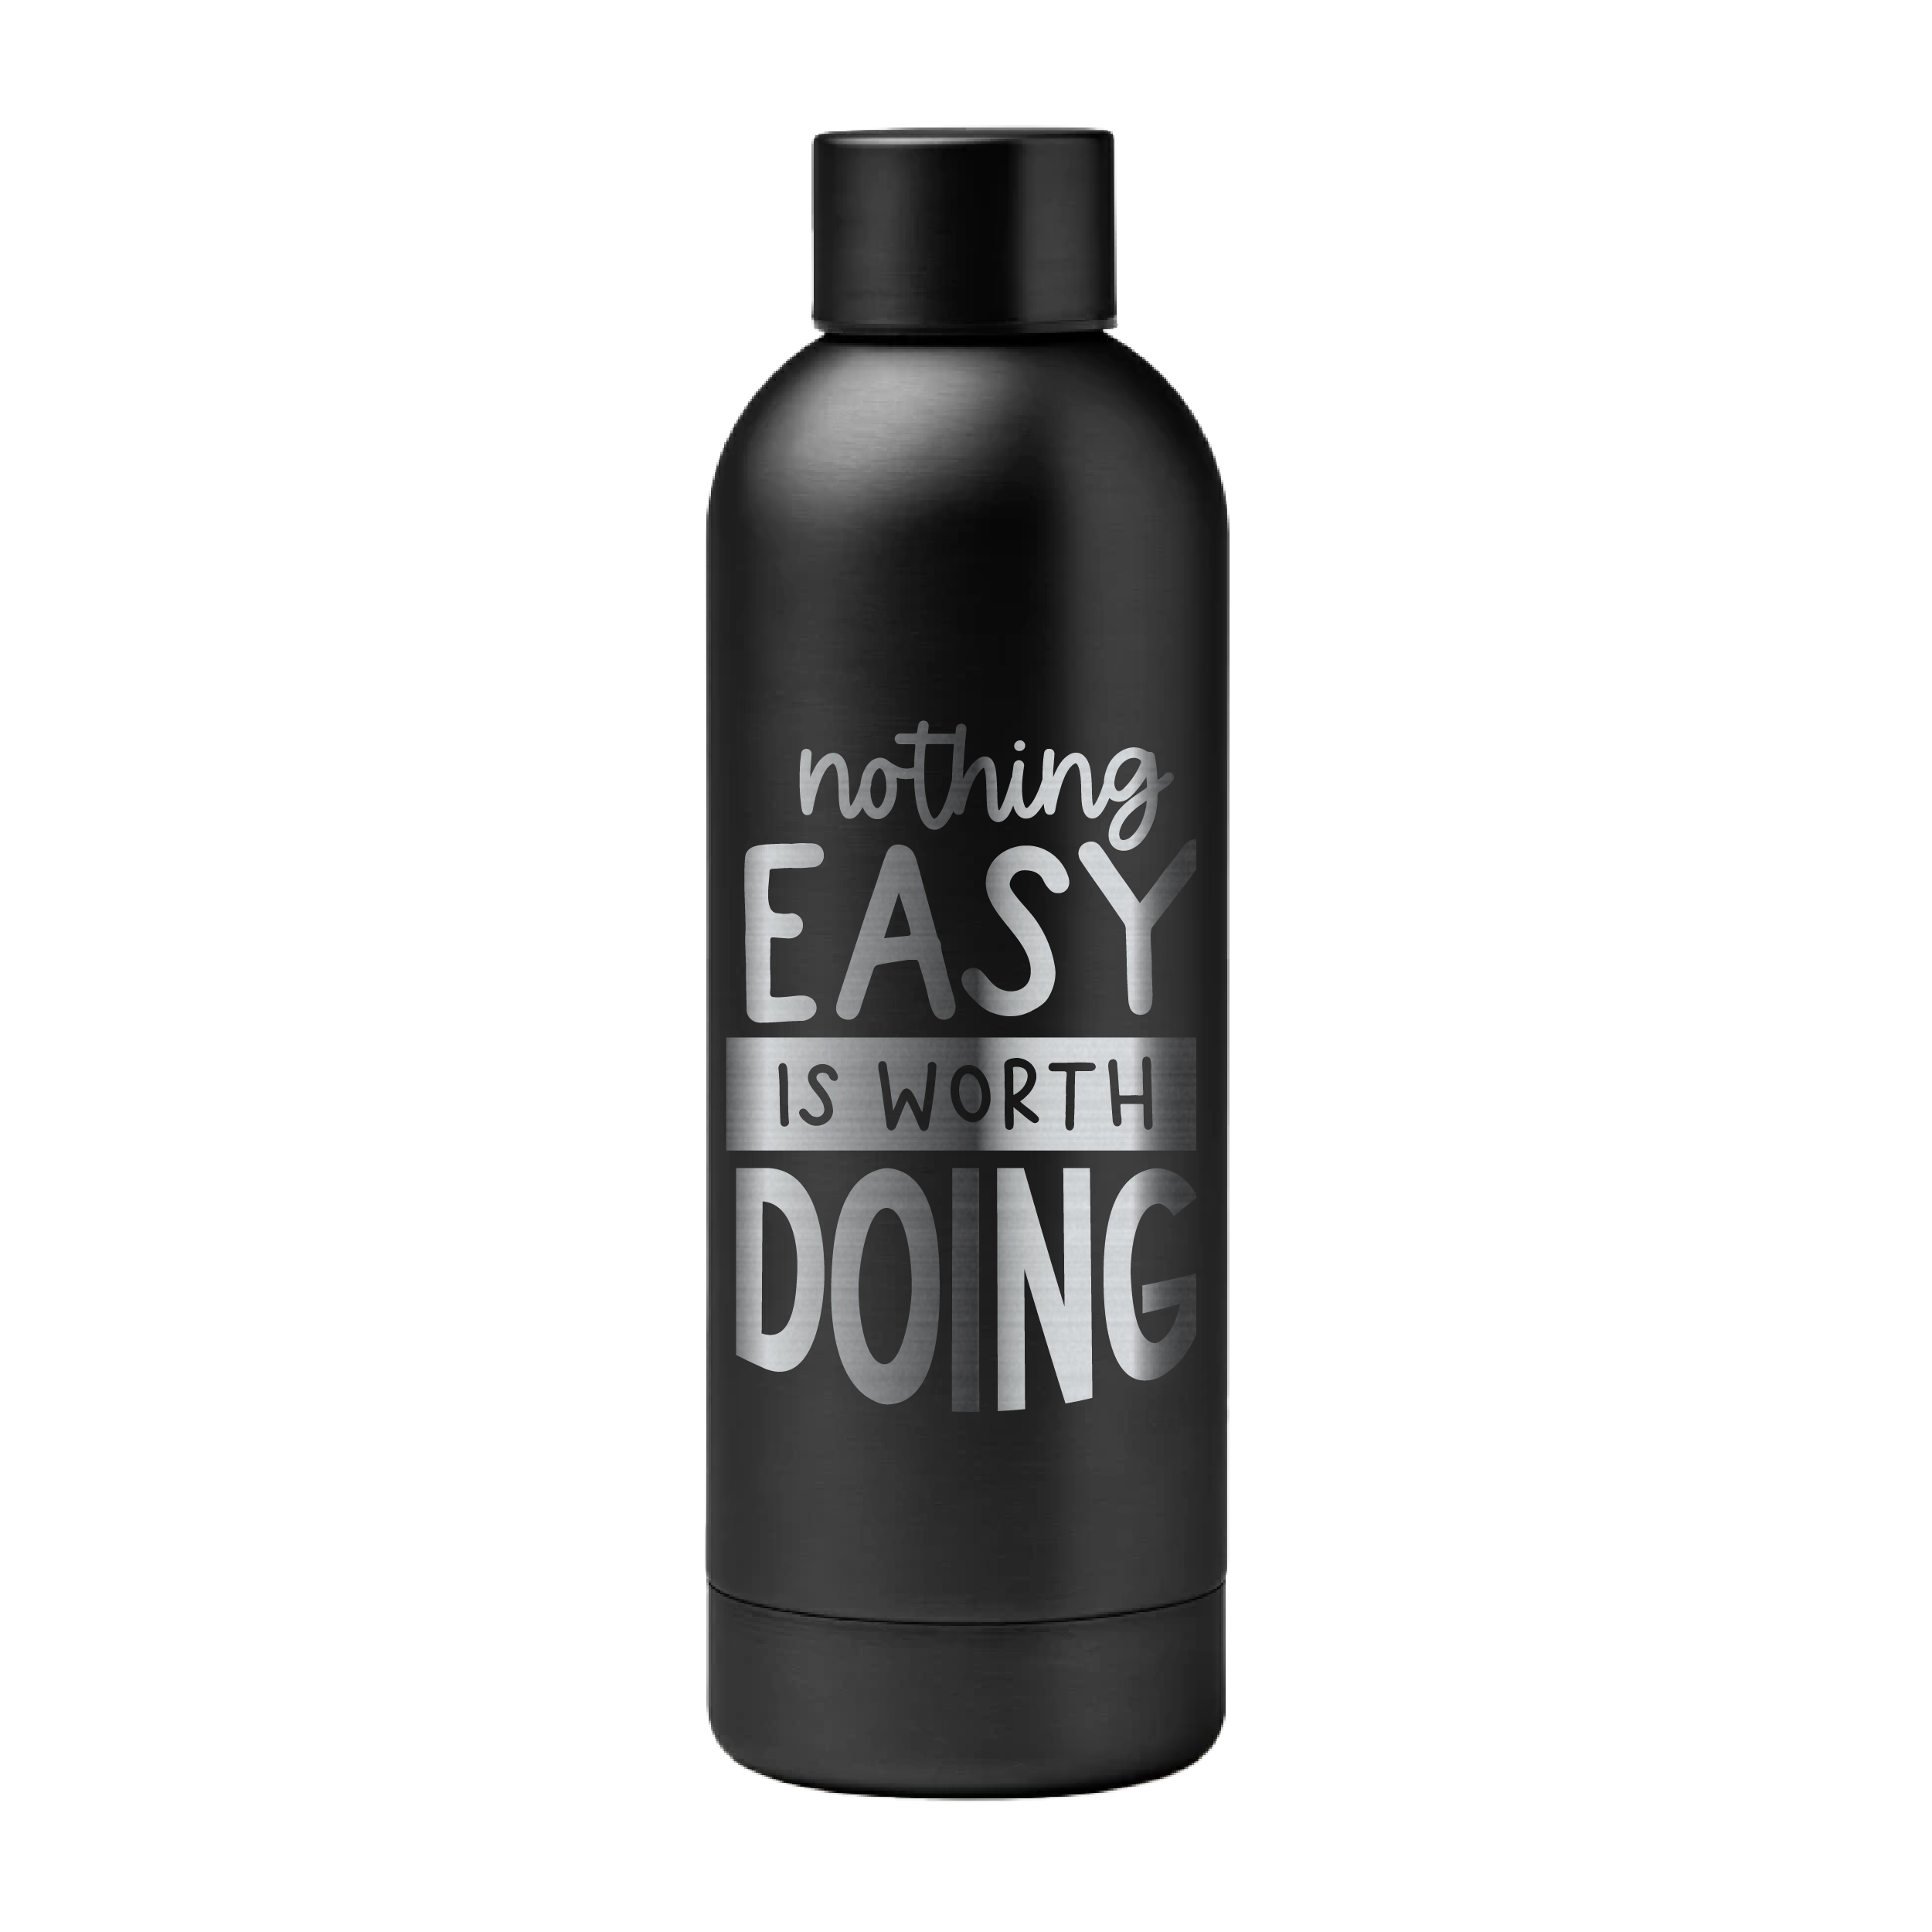 Nothing easy is worth doing - Premium Thermic bottle